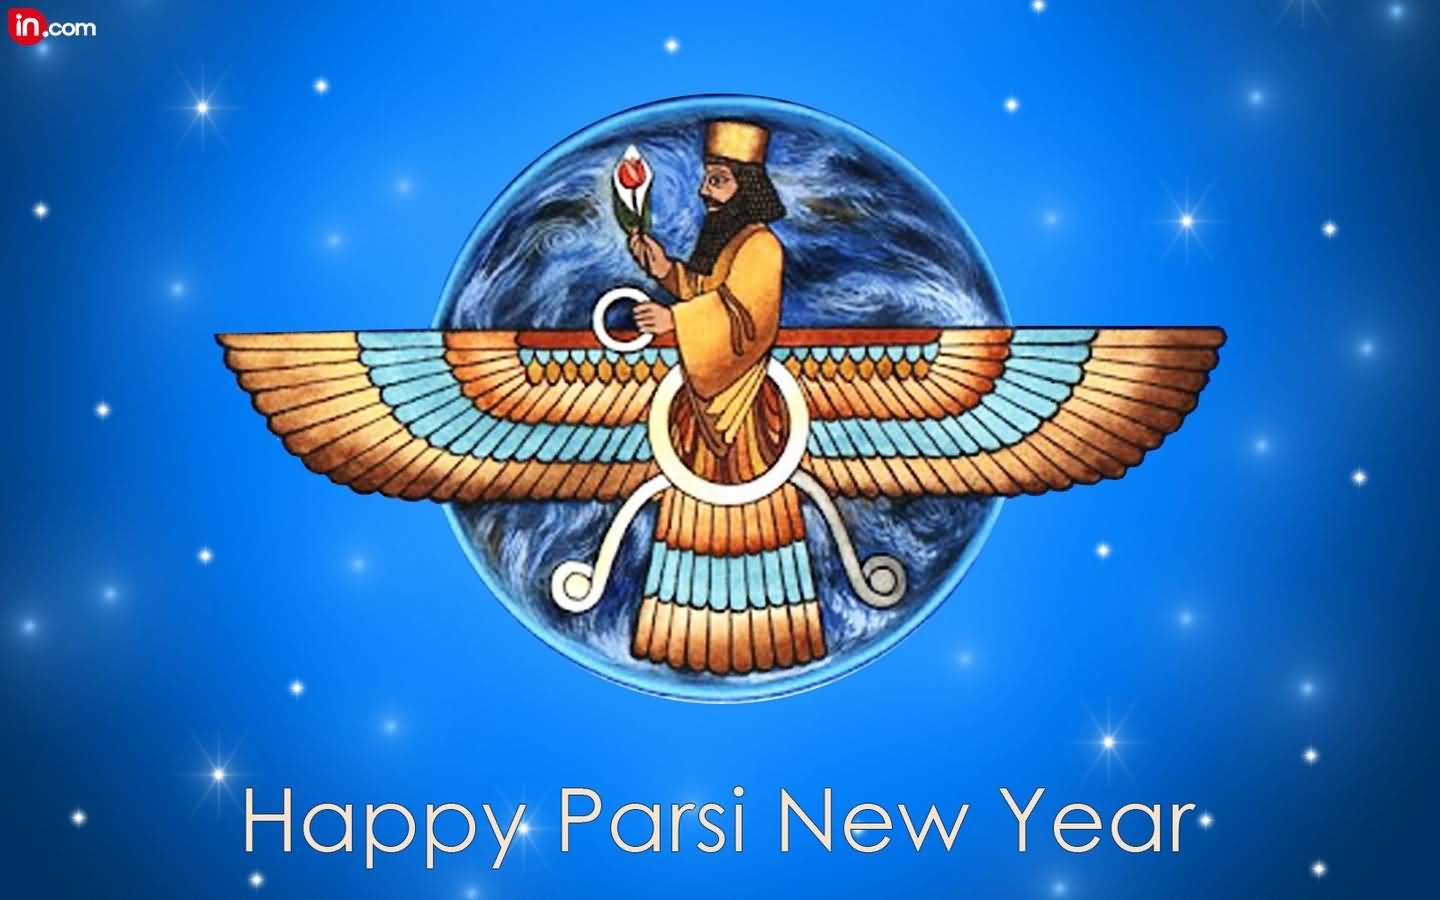 Happy Parsi New Year Wishes Picture